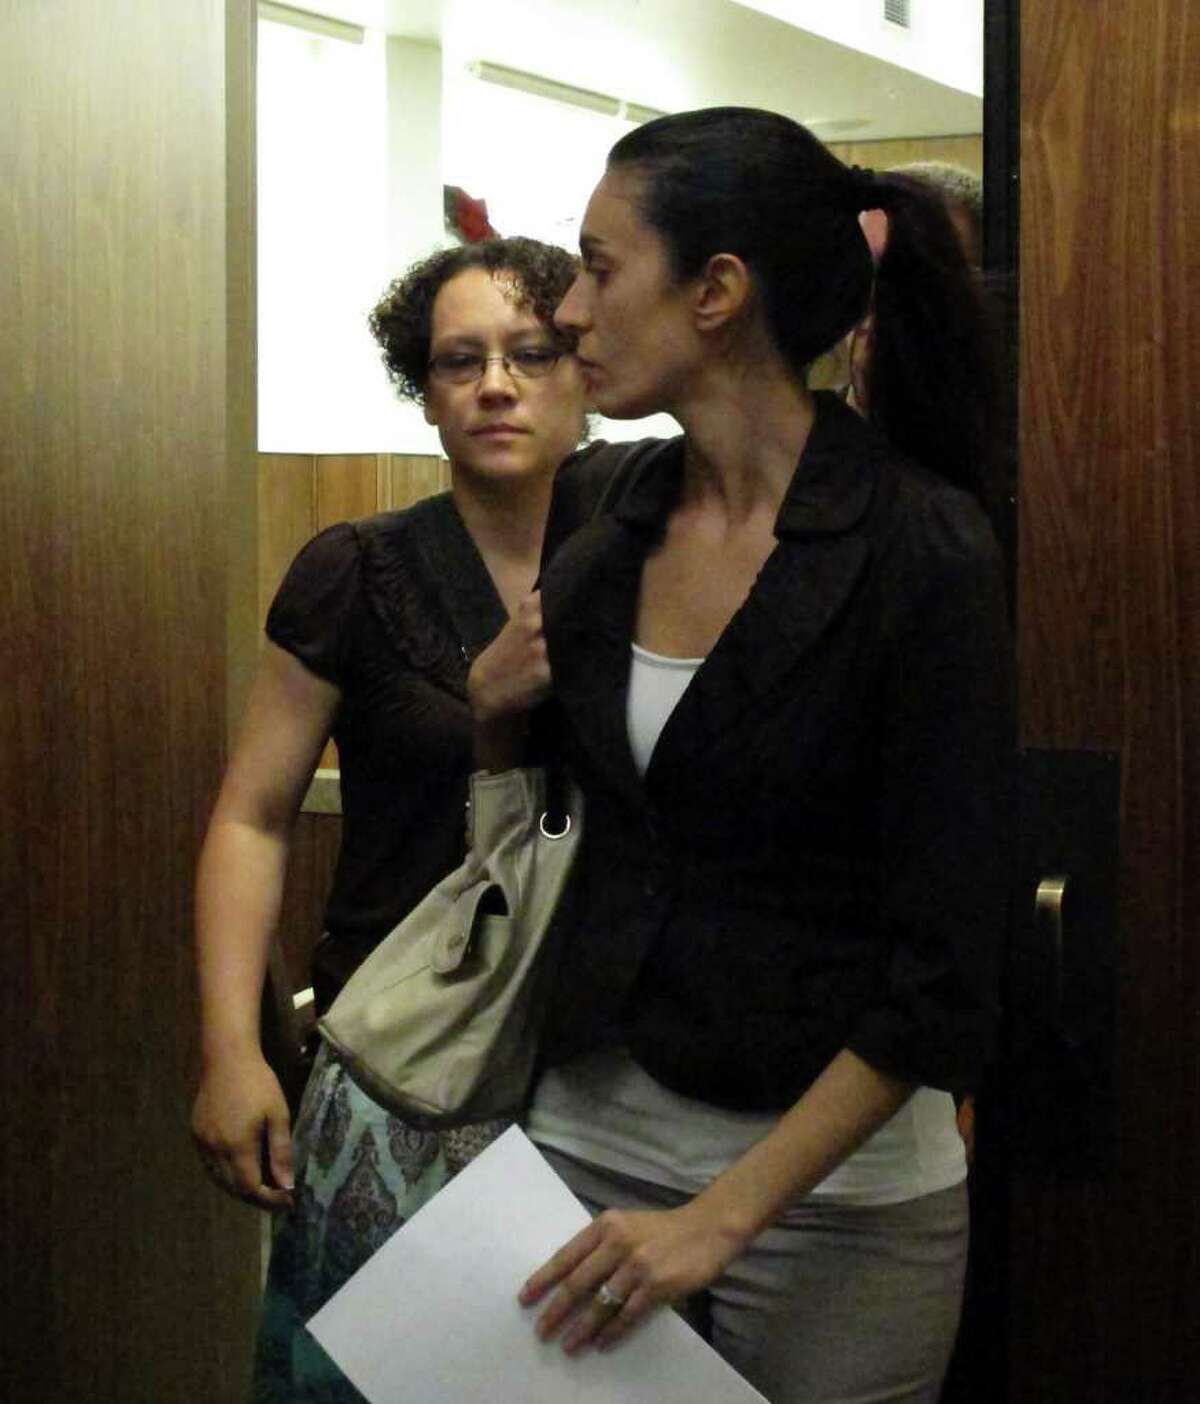 Jessica Beagley, 36, left, leaves court on Tuesday, Aug. 23, 2011, in Anchorage, Alaska, with an unidentified woman. A jury convicted her of misdemeanor child abuse for squirting hot sauce into the mouth of her adopted Russian son as punishment in what prosecutors said was a ploy to get on the "Dr. Phil" TV show. (AP Photo/Mark Thiessen)